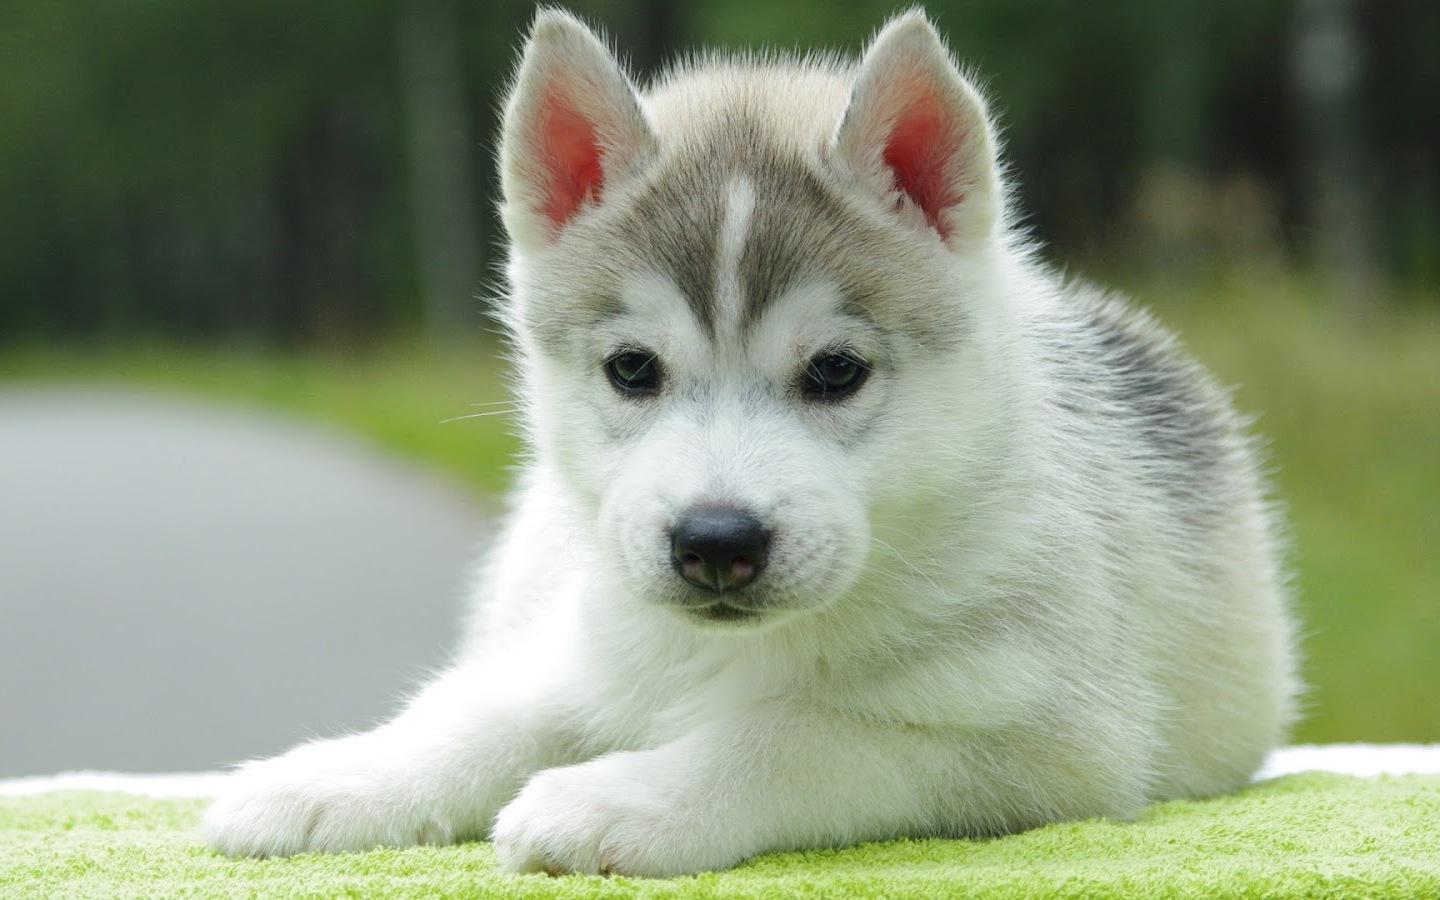 comcute puppy wallpapers for desktop mobile backgroundscute puppy